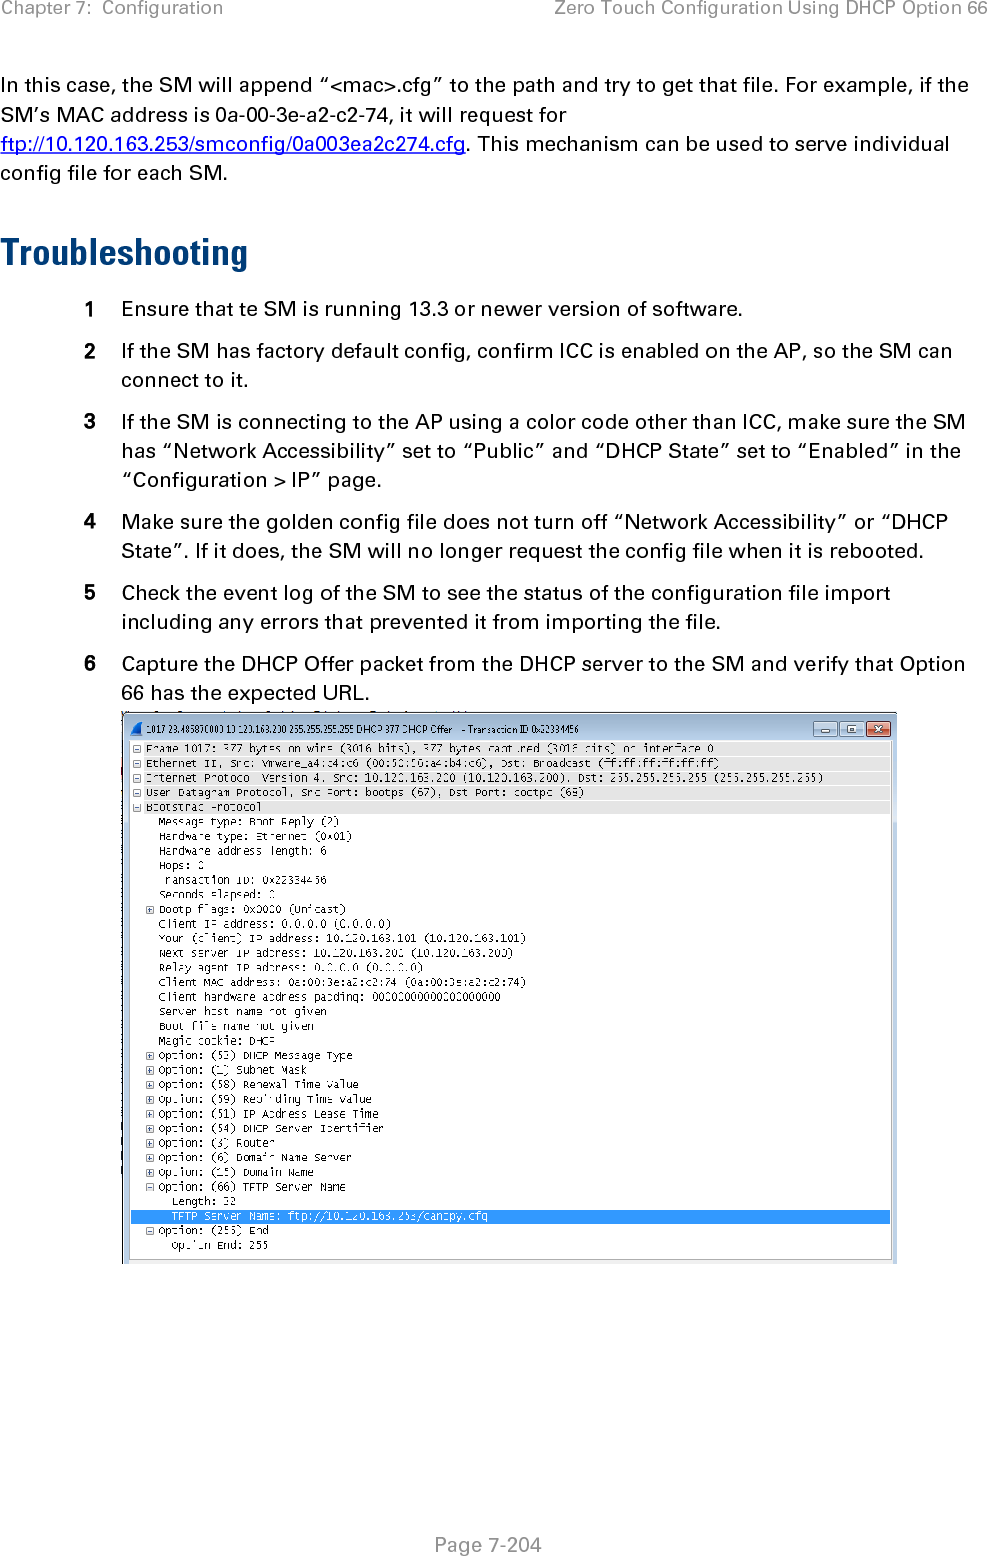 Chapter 7:  Configuration Zero Touch Configuration Using DHCP Option 66   Page 7-204 In this case, the SM will append “&lt;mac&gt;.cfg” to the path and try to get that file. For example, if the SM’s MAC address is 0a-00-3e-a2-c2-74, it will request for ftp://10.120.163.253/smconfig/0a003ea2c274.cfg. This mechanism can be used to serve individual config file for each SM.  Troubleshooting 1 Ensure that te SM is running 13.3 or newer version of software. 2 If the SM has factory default config, confirm ICC is enabled on the AP, so the SM can connect to it.  3 If the SM is connecting to the AP using a color code other than ICC, make sure the SM has “Network Accessibility” set to “Public” and “DHCP State” set to “Enabled” in the “Configuration &gt; IP” page. 4 Make sure the golden config file does not turn off “Network Accessibility” or “DHCP State”. If it does, the SM will no longer request the config file when it is rebooted. 5 Check the event log of the SM to see the status of the configuration file import including any errors that prevented it from importing the file. 6 Capture the DHCP Offer packet from the DHCP server to the SM and verify that Option 66 has the expected URL.   